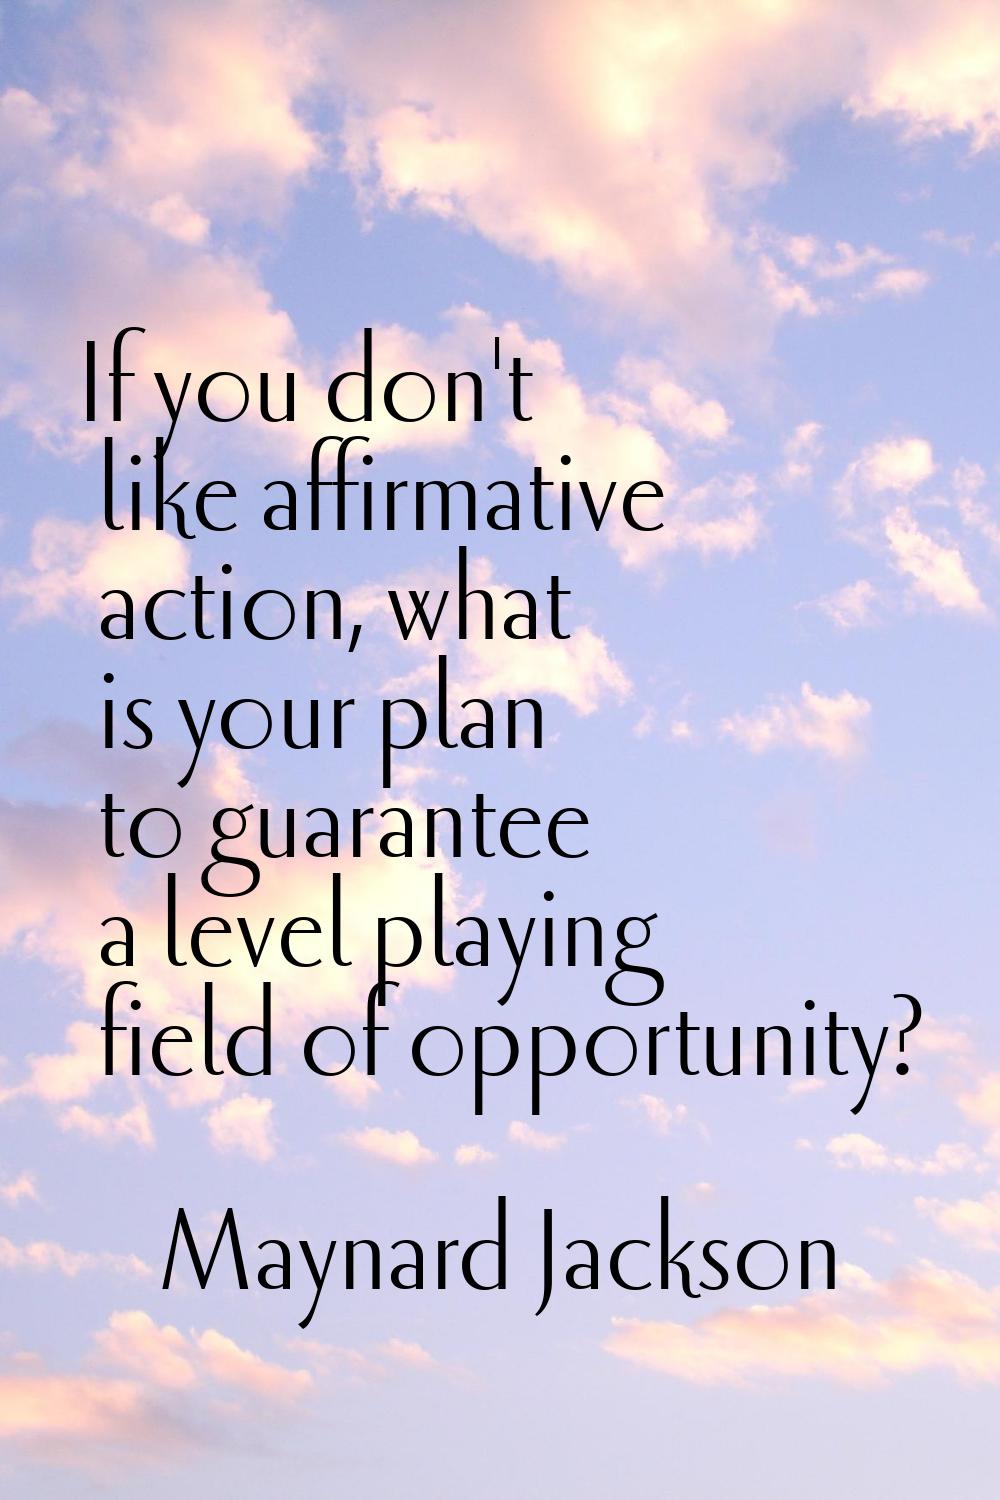 If you don't like affirmative action, what is your plan to guarantee a level playing field of oppor